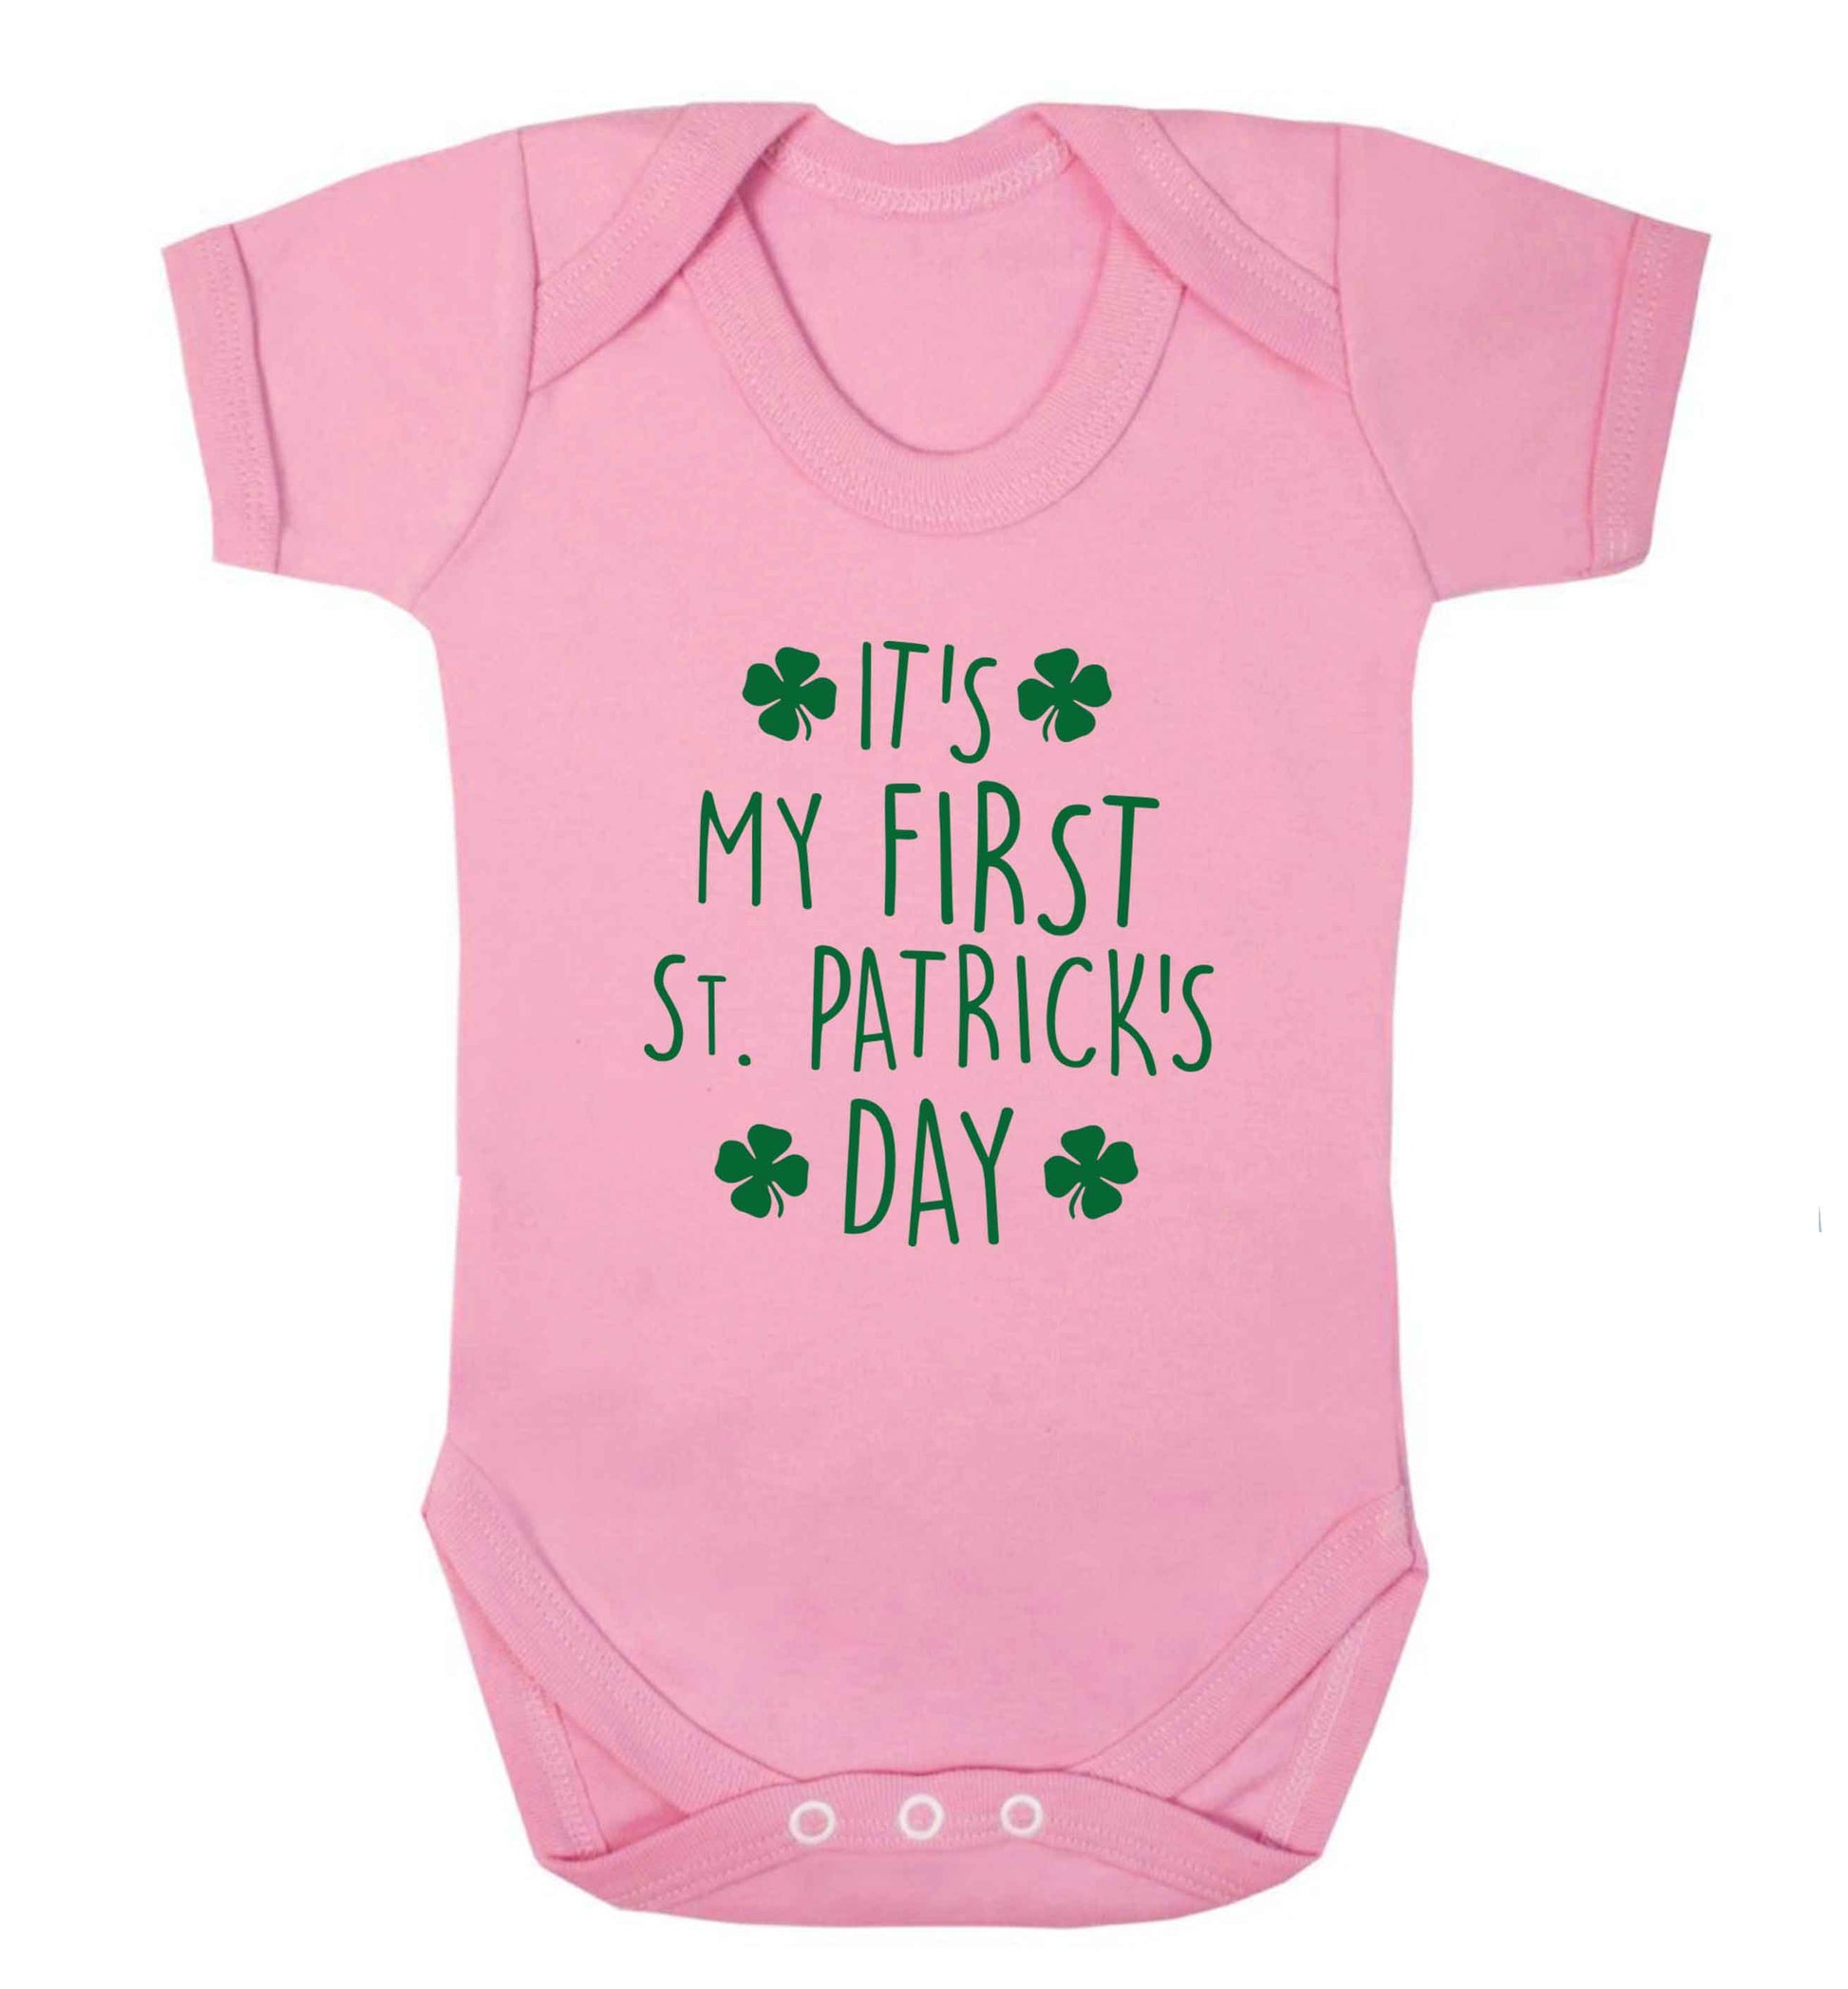 It's my first St.Patrick's day baby vest pale pink 18-24 months